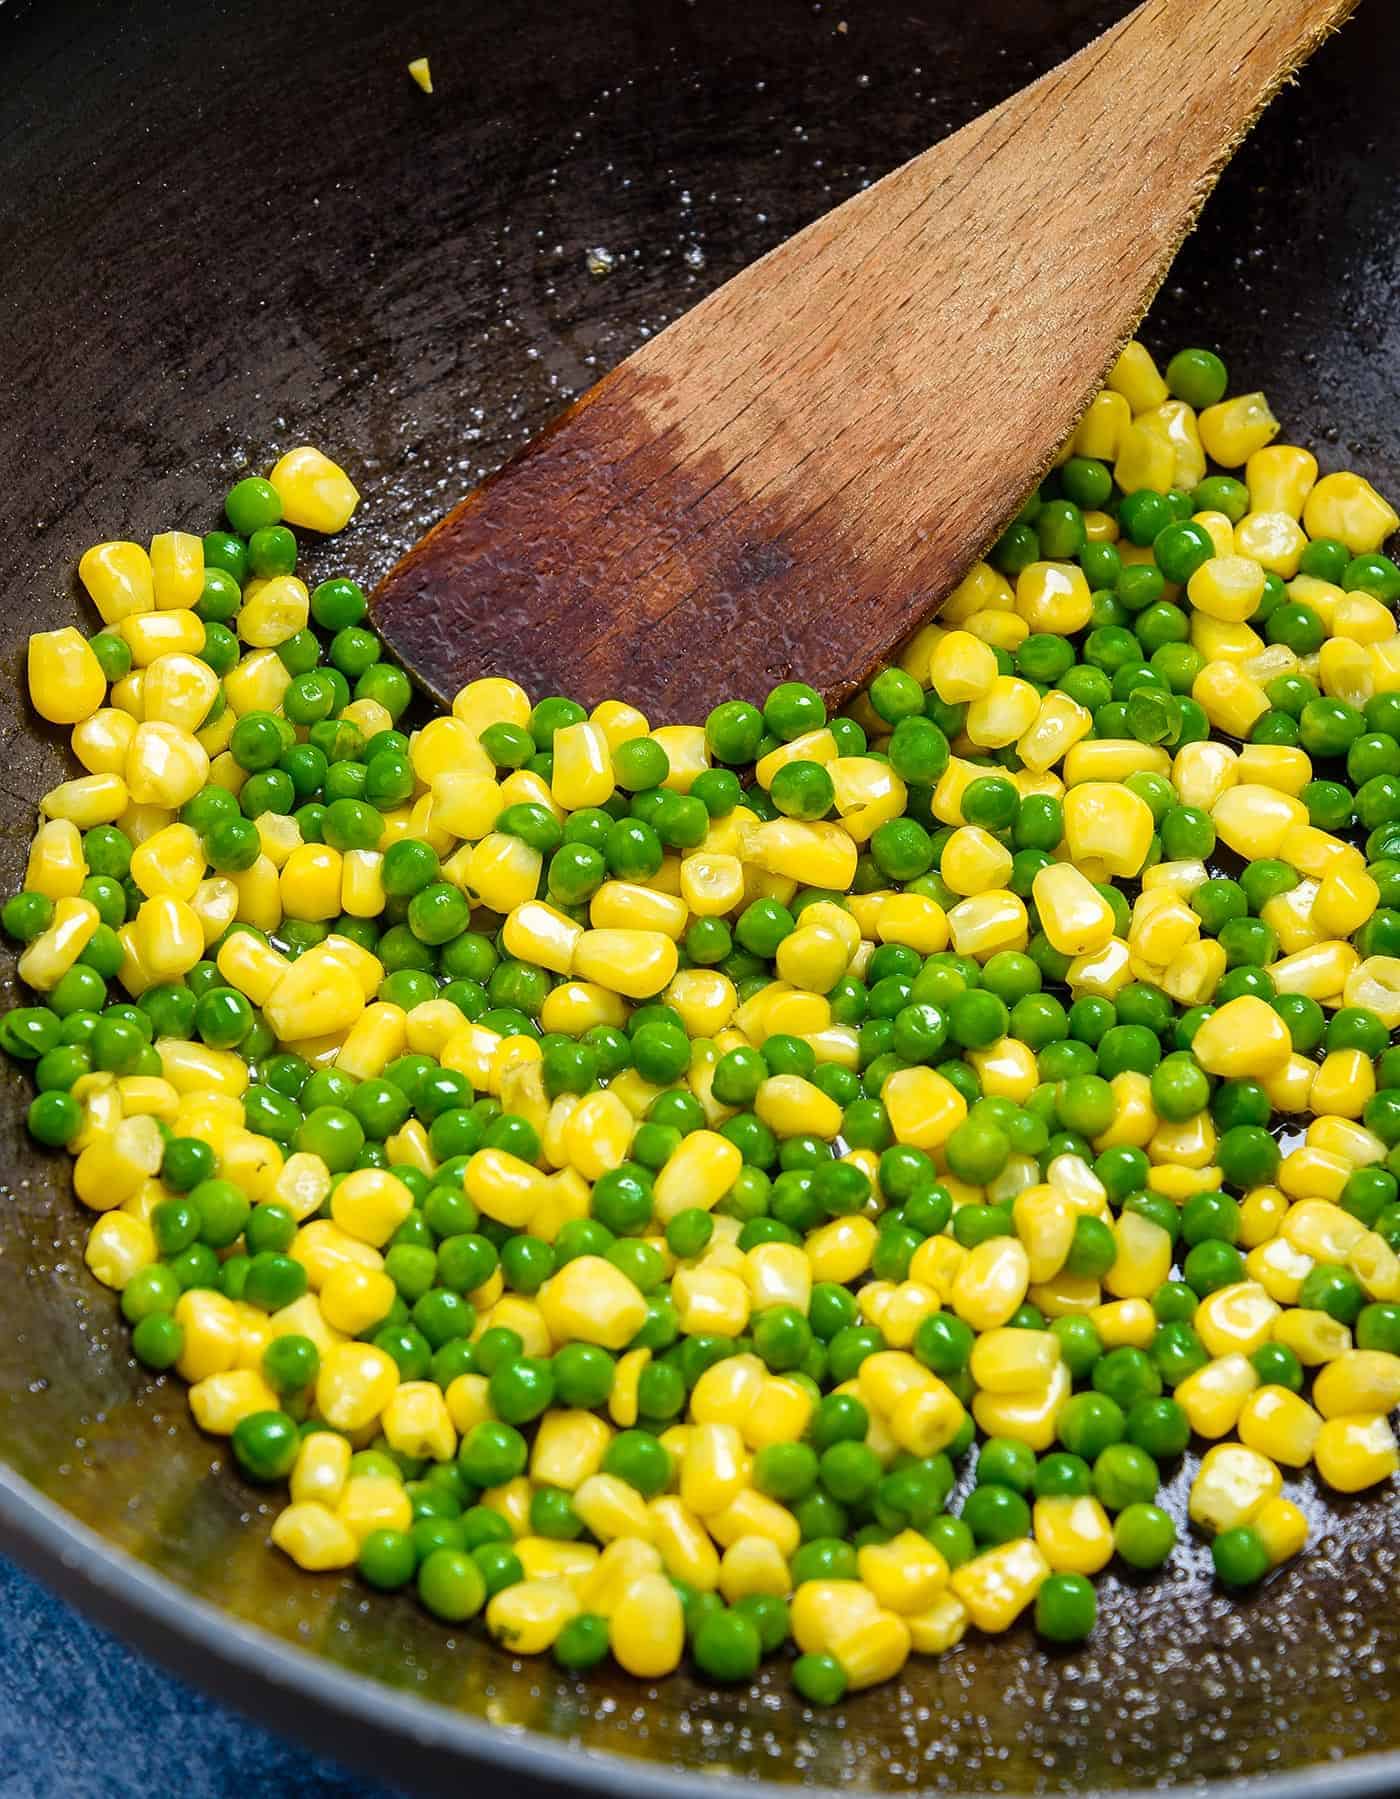 Stir-frying the peas and sweetcorn